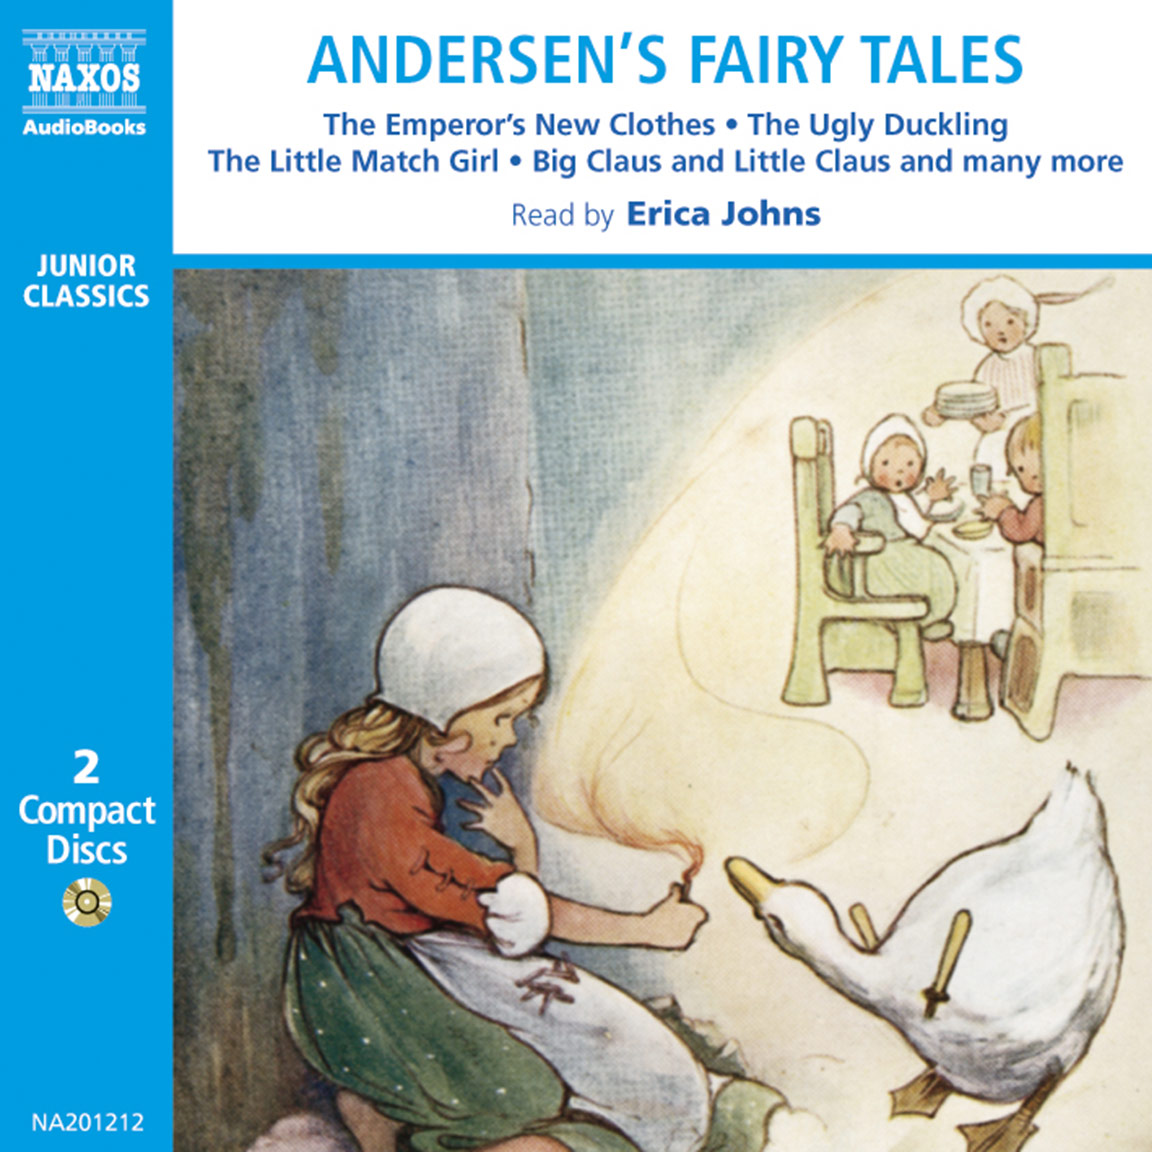 Andersen's Fairy Tales (selections)